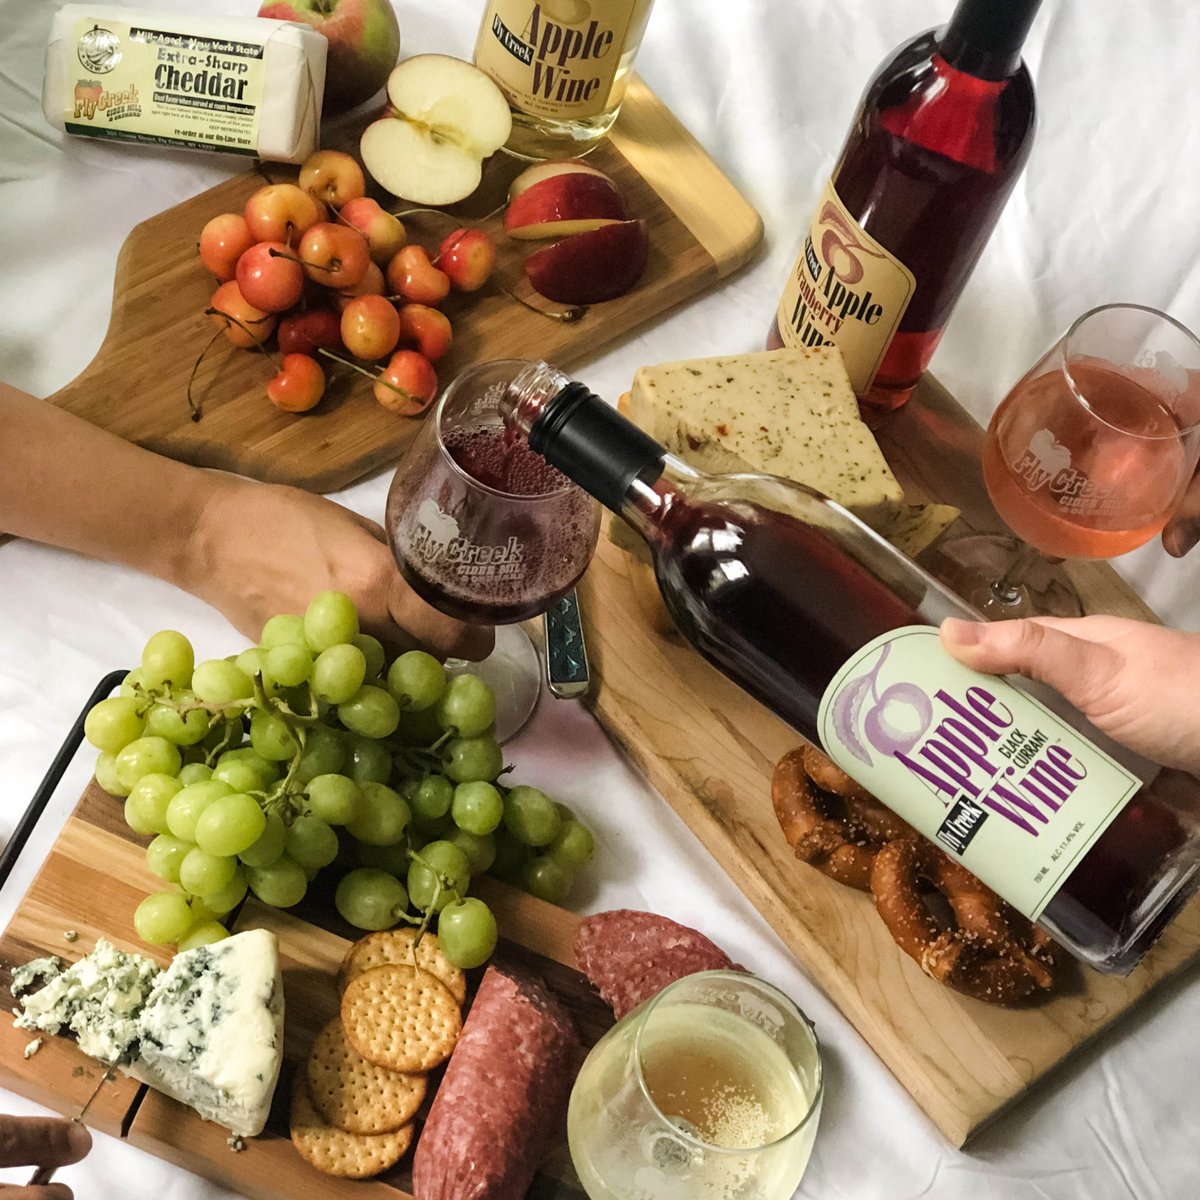 Send 2019 out in style... with snacks! 
.
.
 #FlyCreekCiderMill #CiderMill #Cooperstown #WeAreCooperstown #GoCooperstown #UpstateNY #ThisIsCooperstown #WeGoCooperstown #CooperstownNY #CooperstownNewYork #Travel #NewYorkGetaways #ILoveNY #NewYorkState